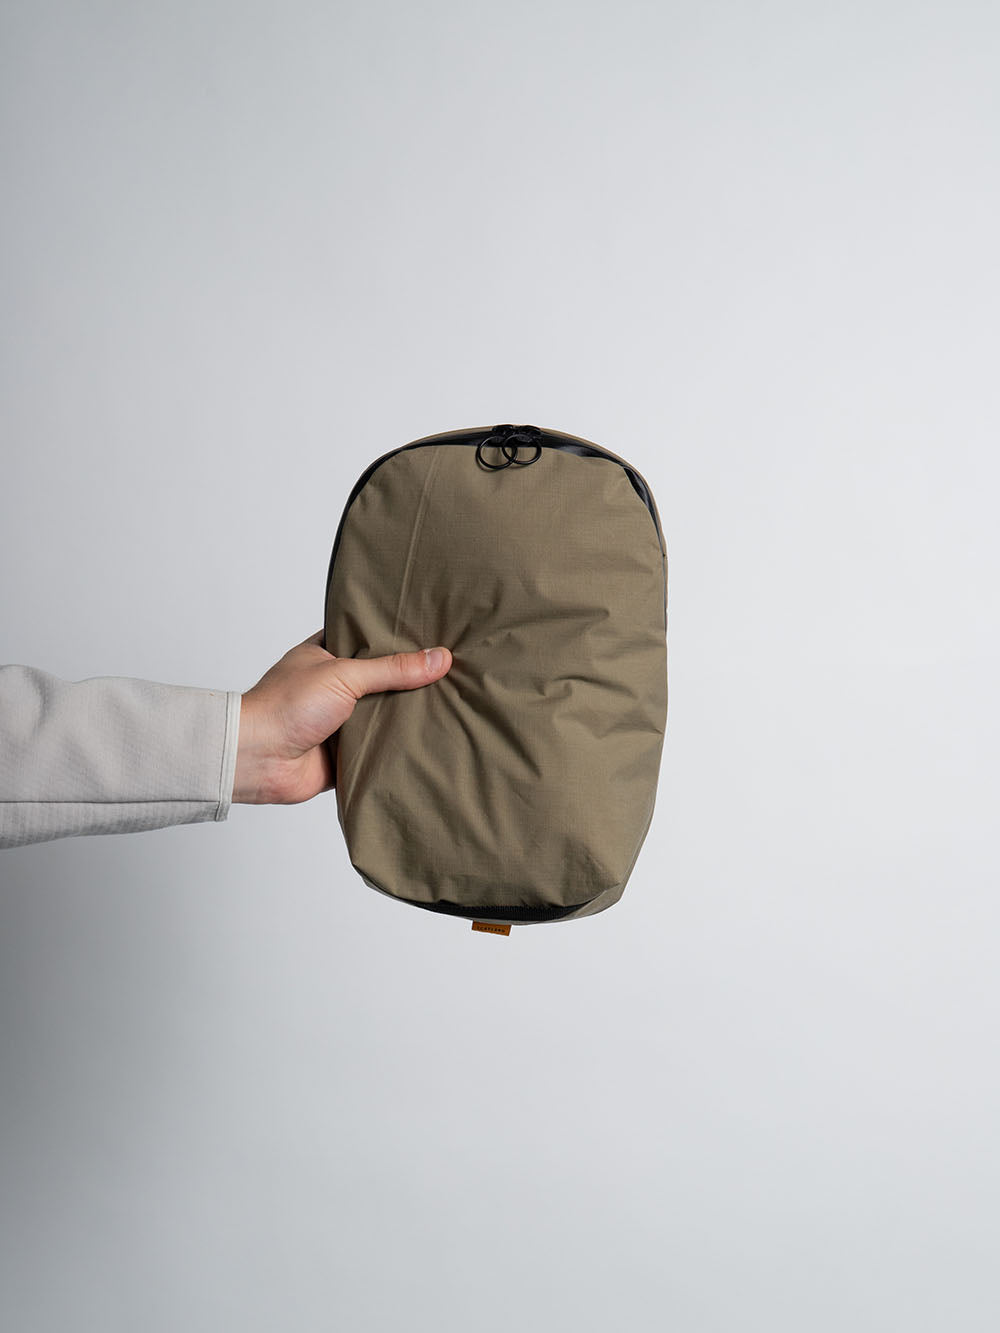 Foulden Clamshell Packing Cubes | Ripstop-Edition